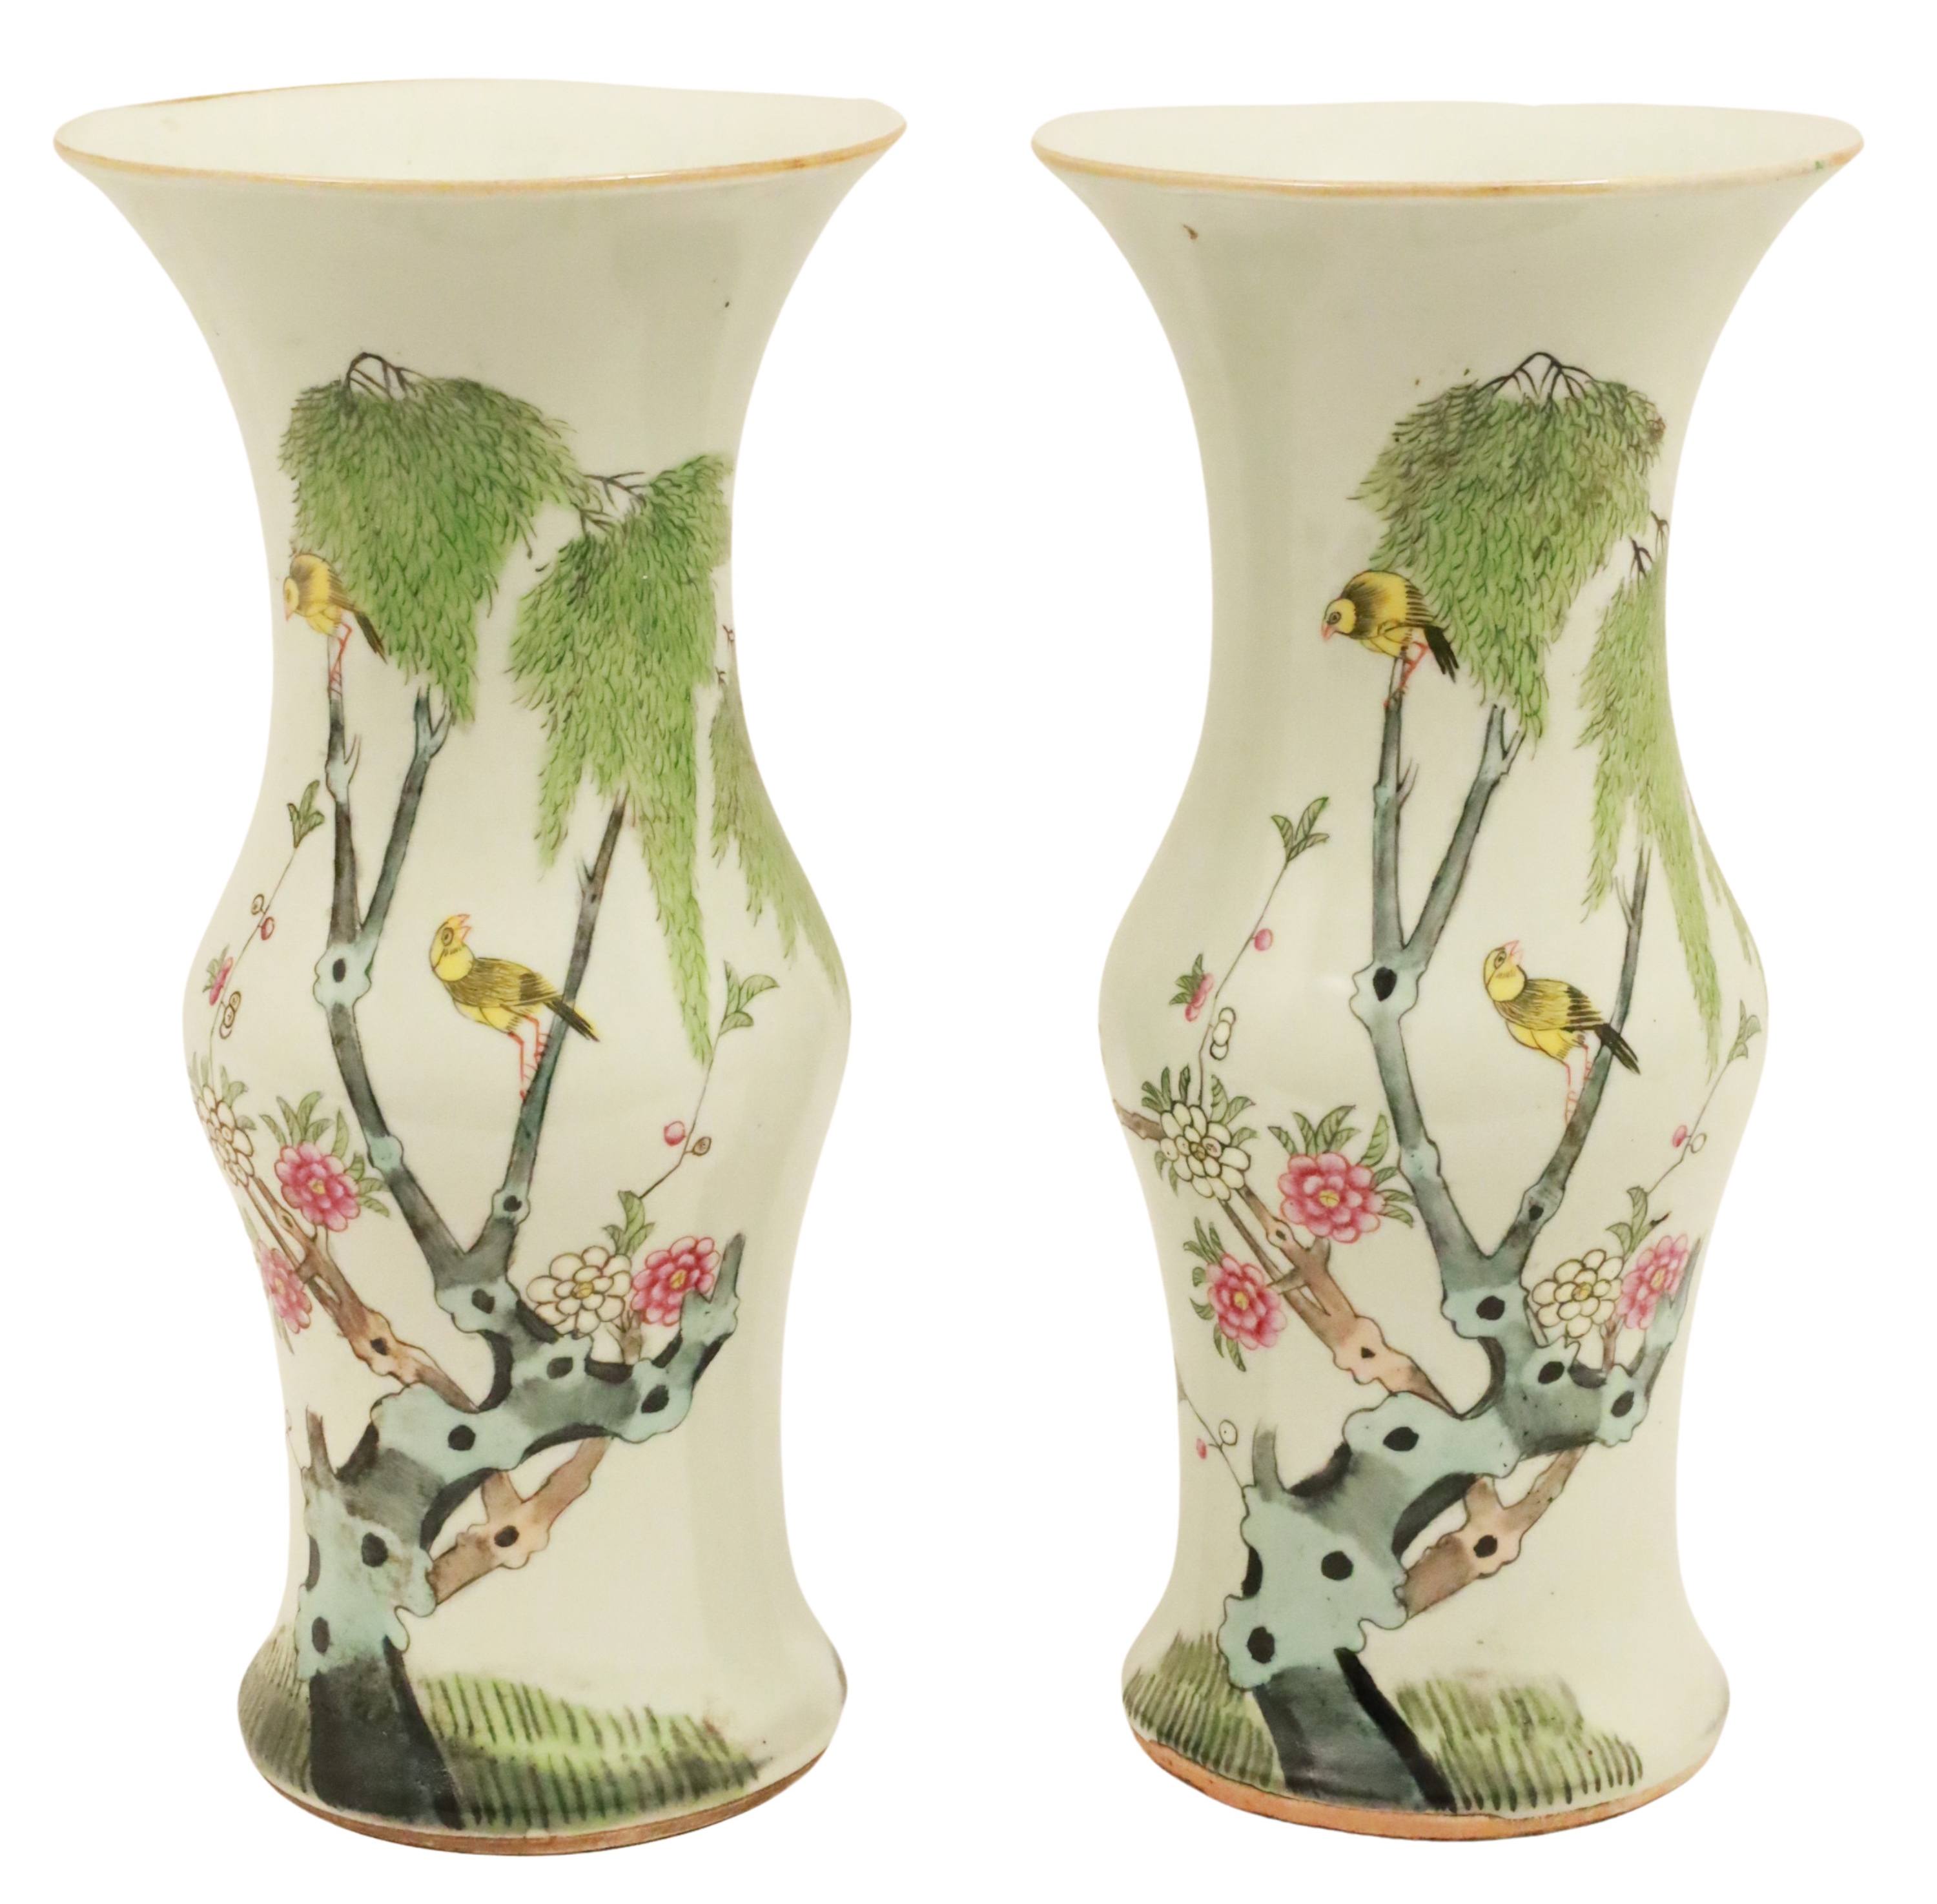 PAIR OF CHINESE QIANJIANG VASES